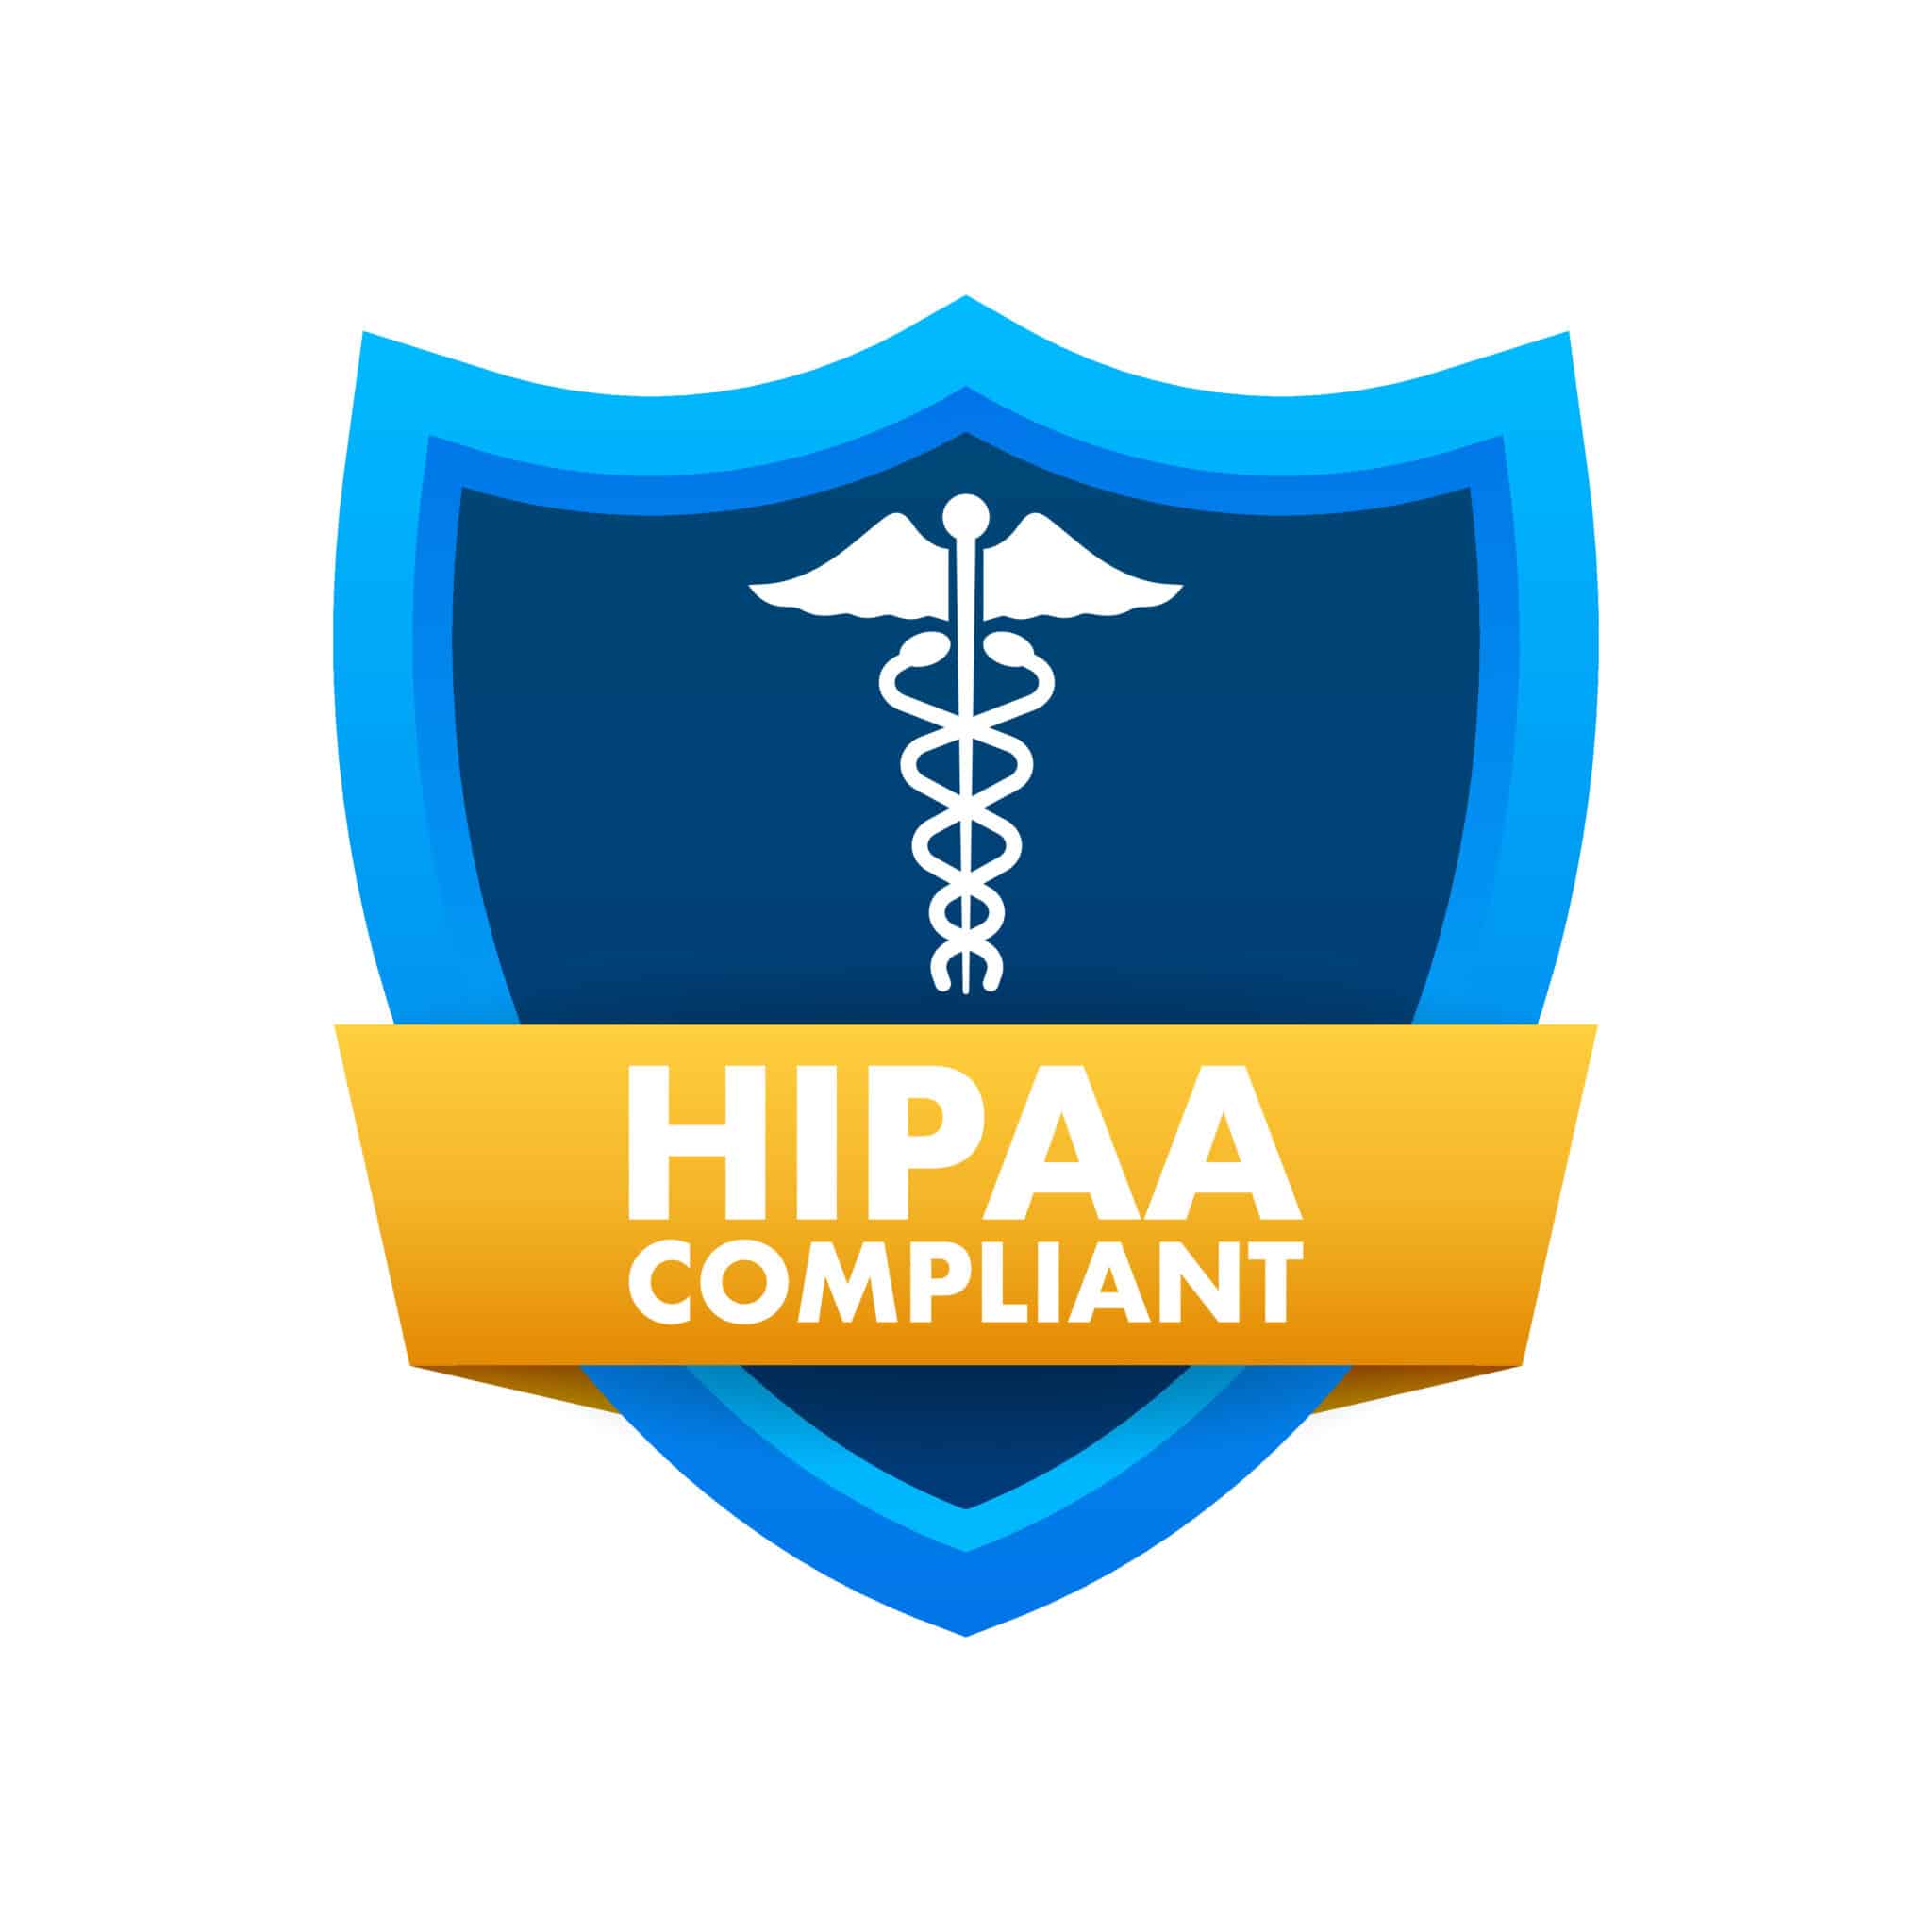 HIPAA compliant logo, denoting Athreon's adherence to healthcare privacy and security standards.